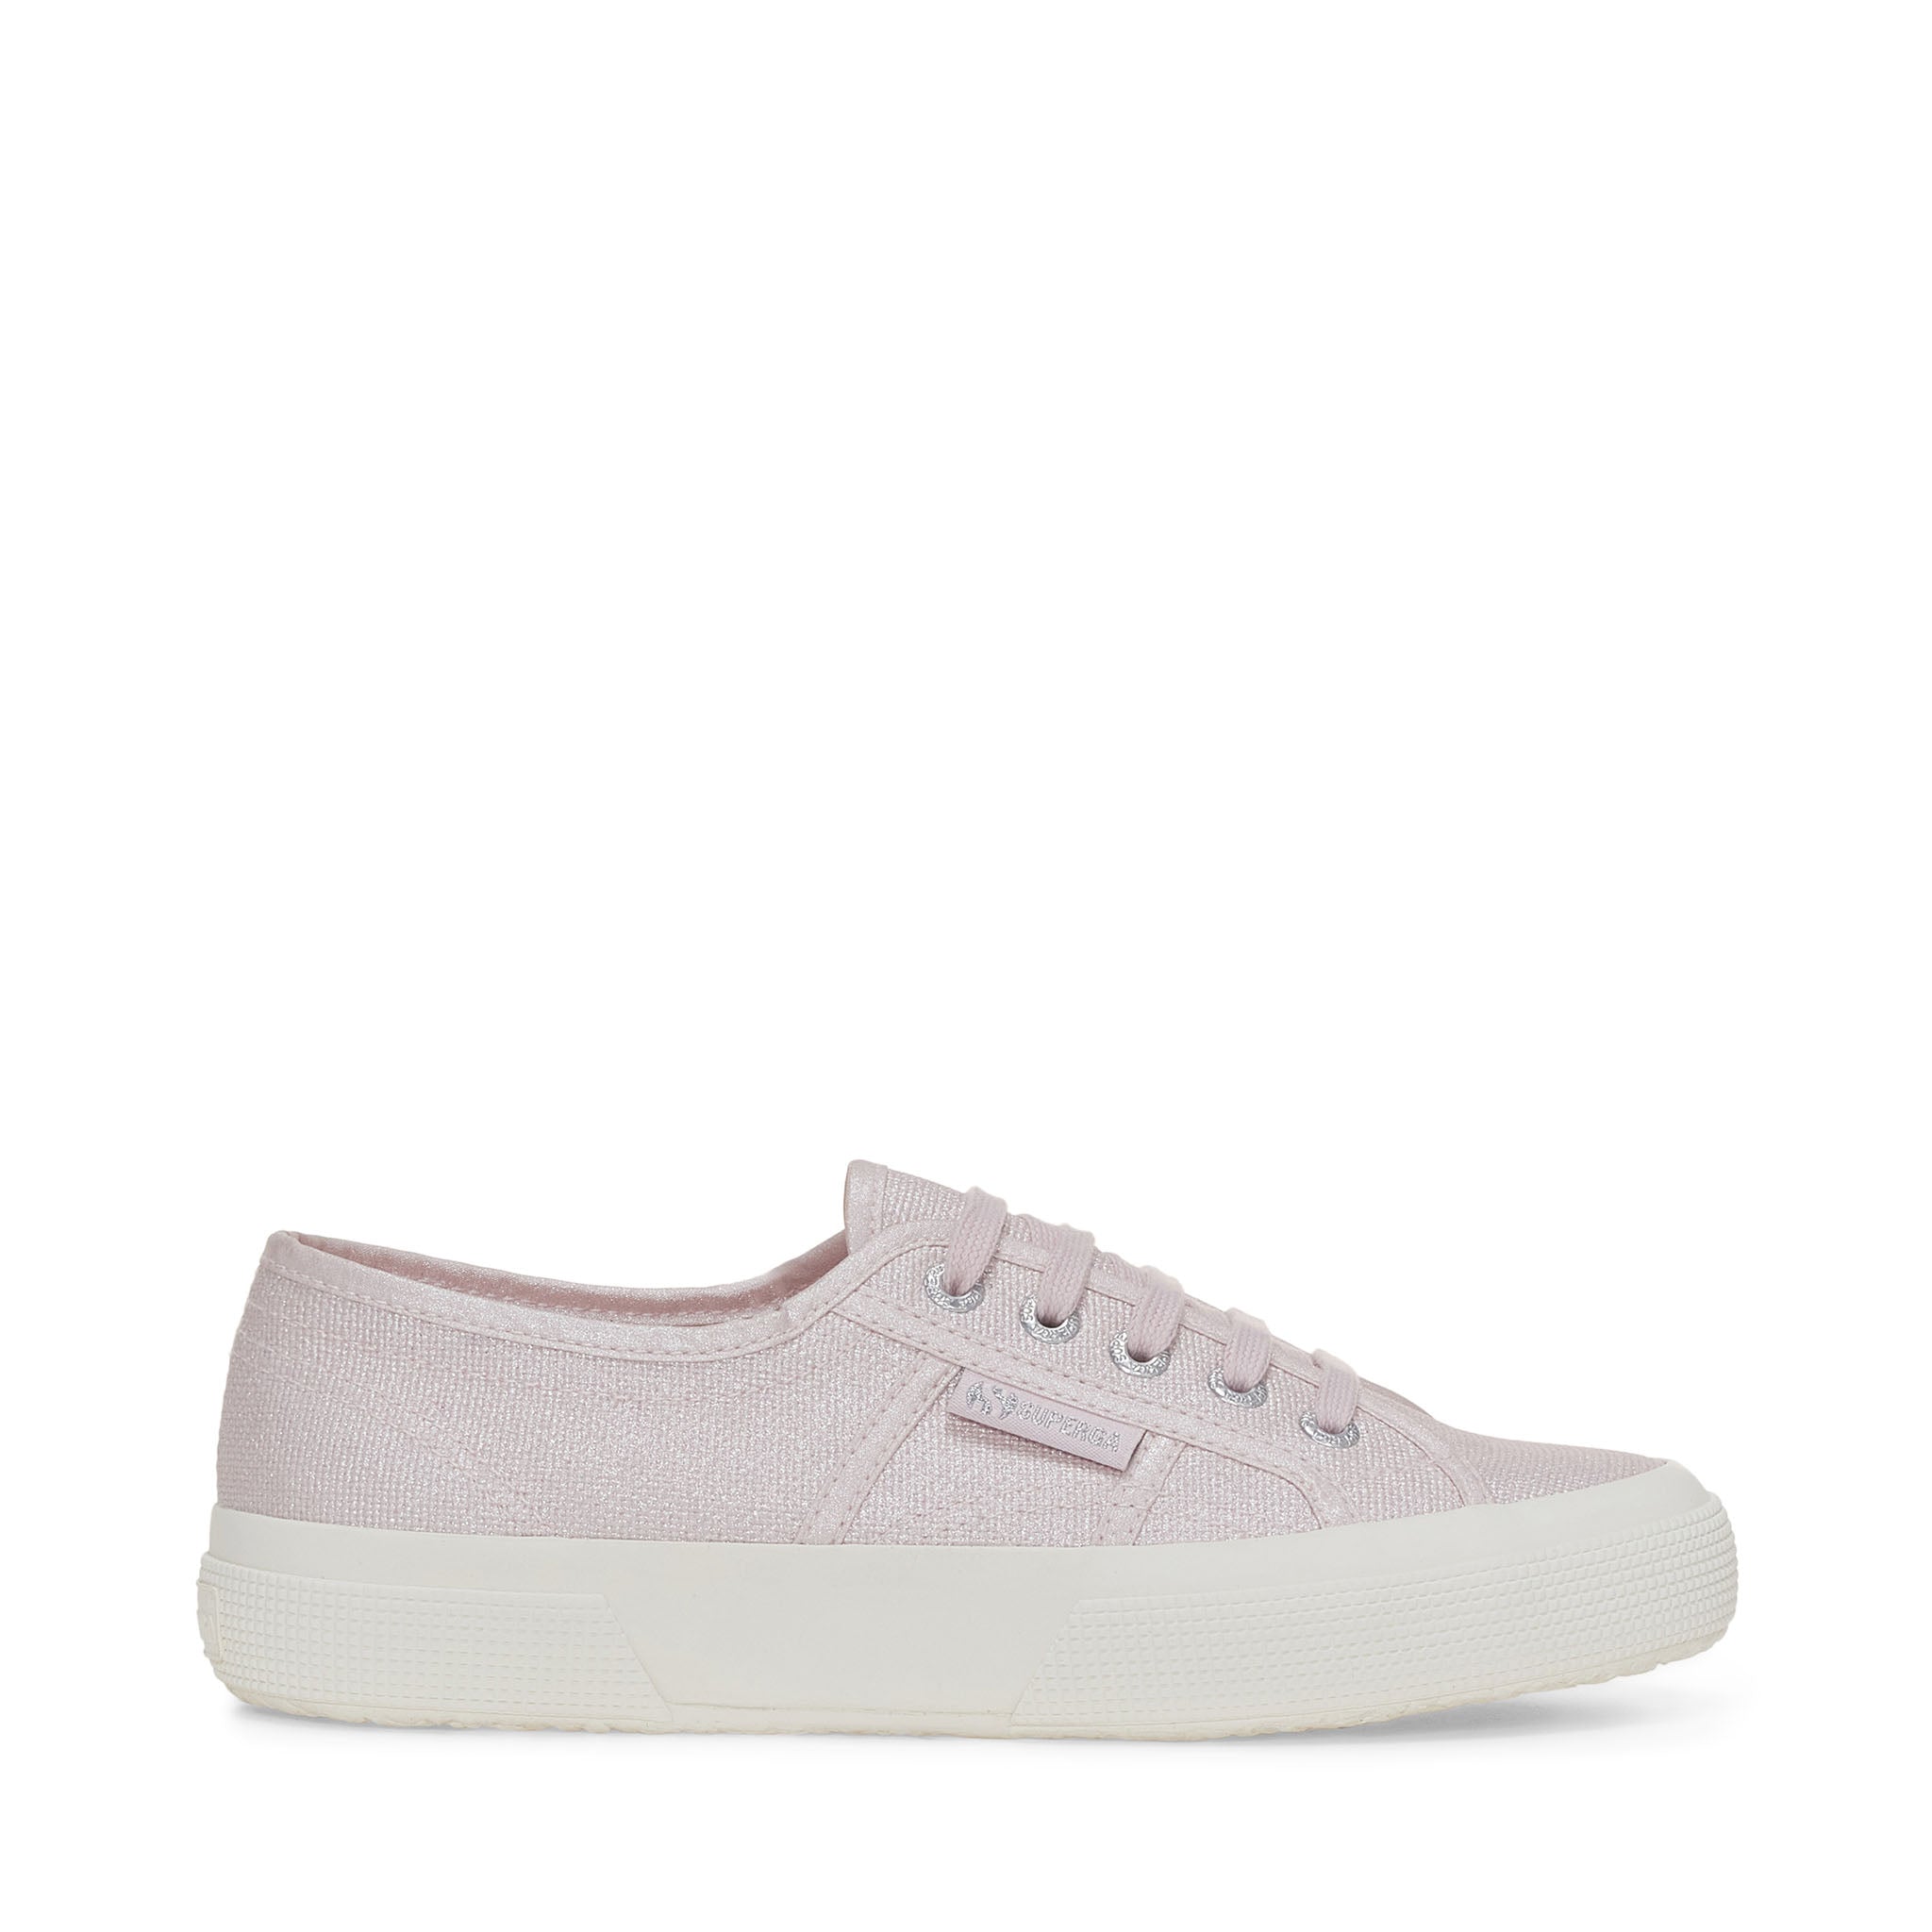 Superga 2750 Pearl Matte Canvas Sneakers - Violet Hushed Avorio. Side view.